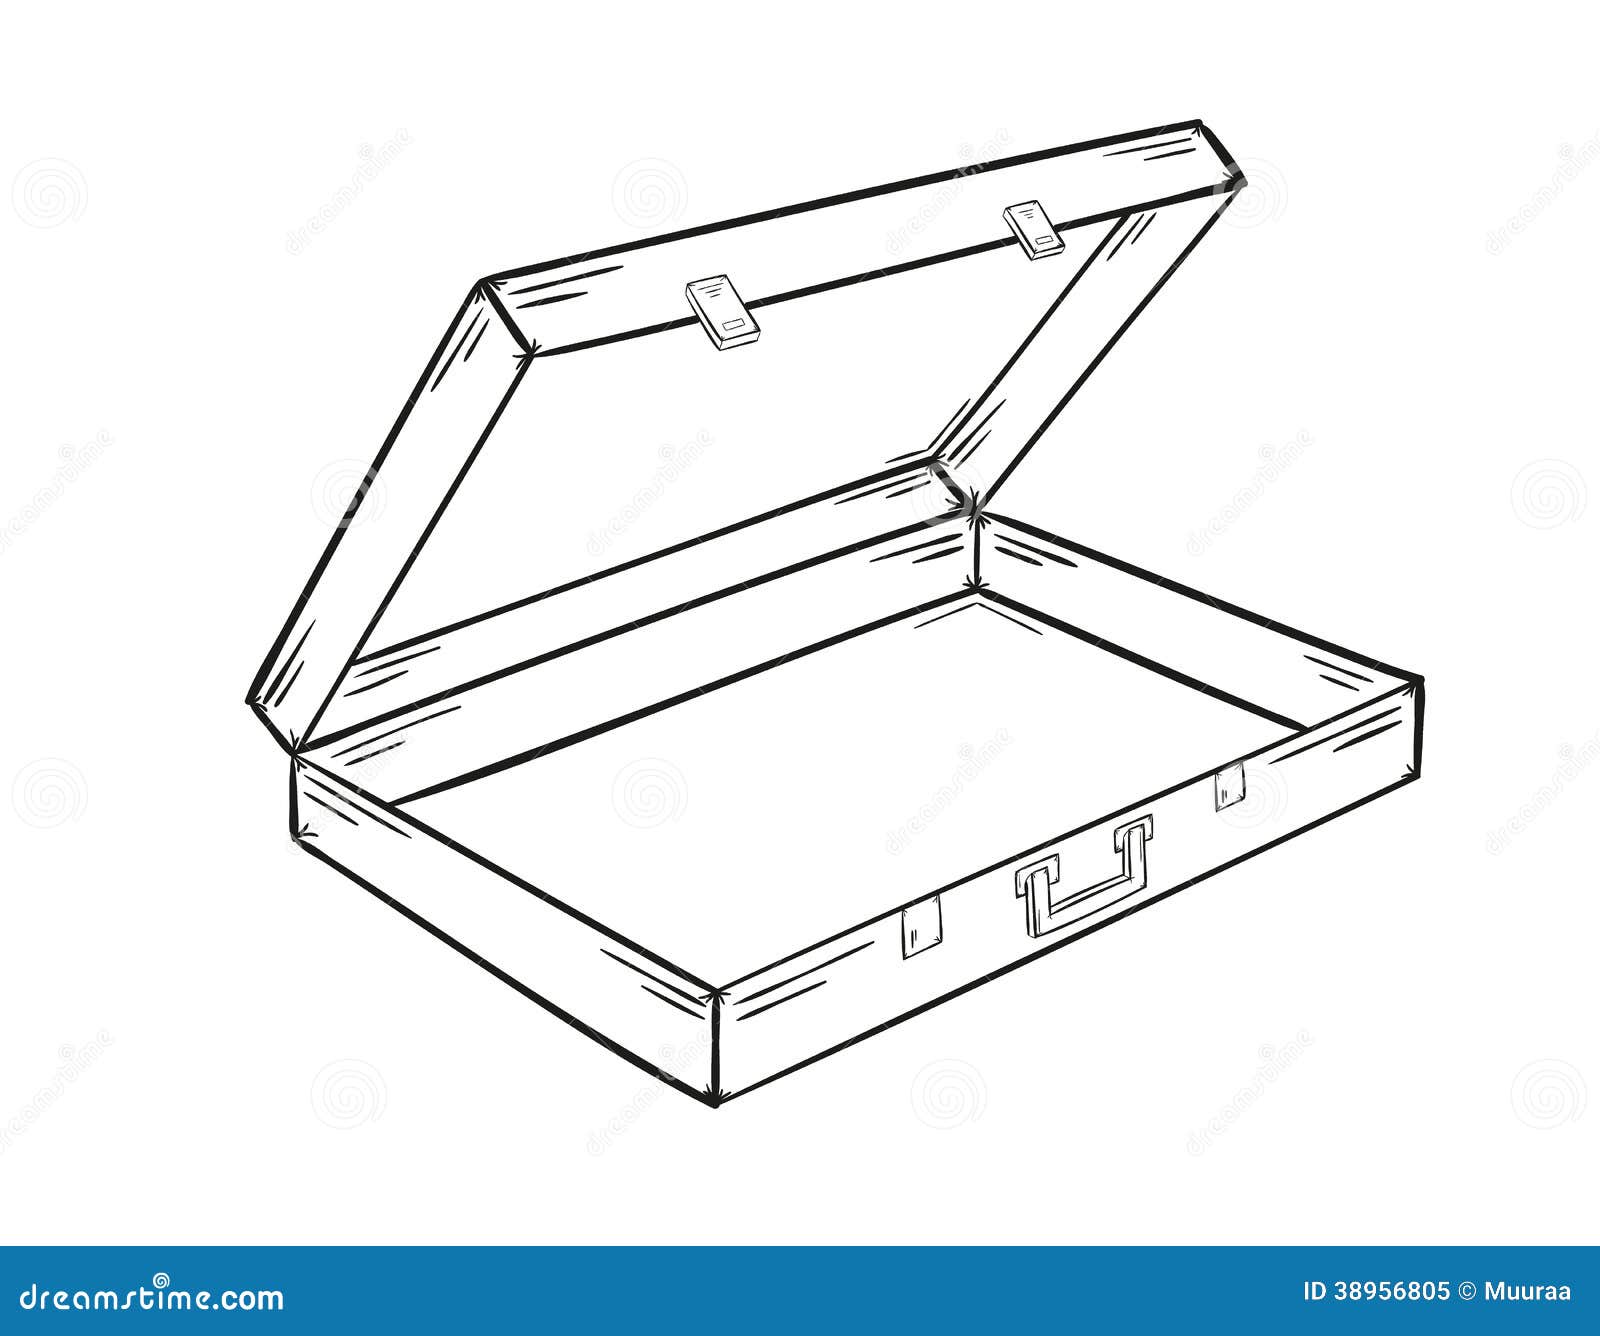 Open box hand drawn sketch Royalty Free Vector Image